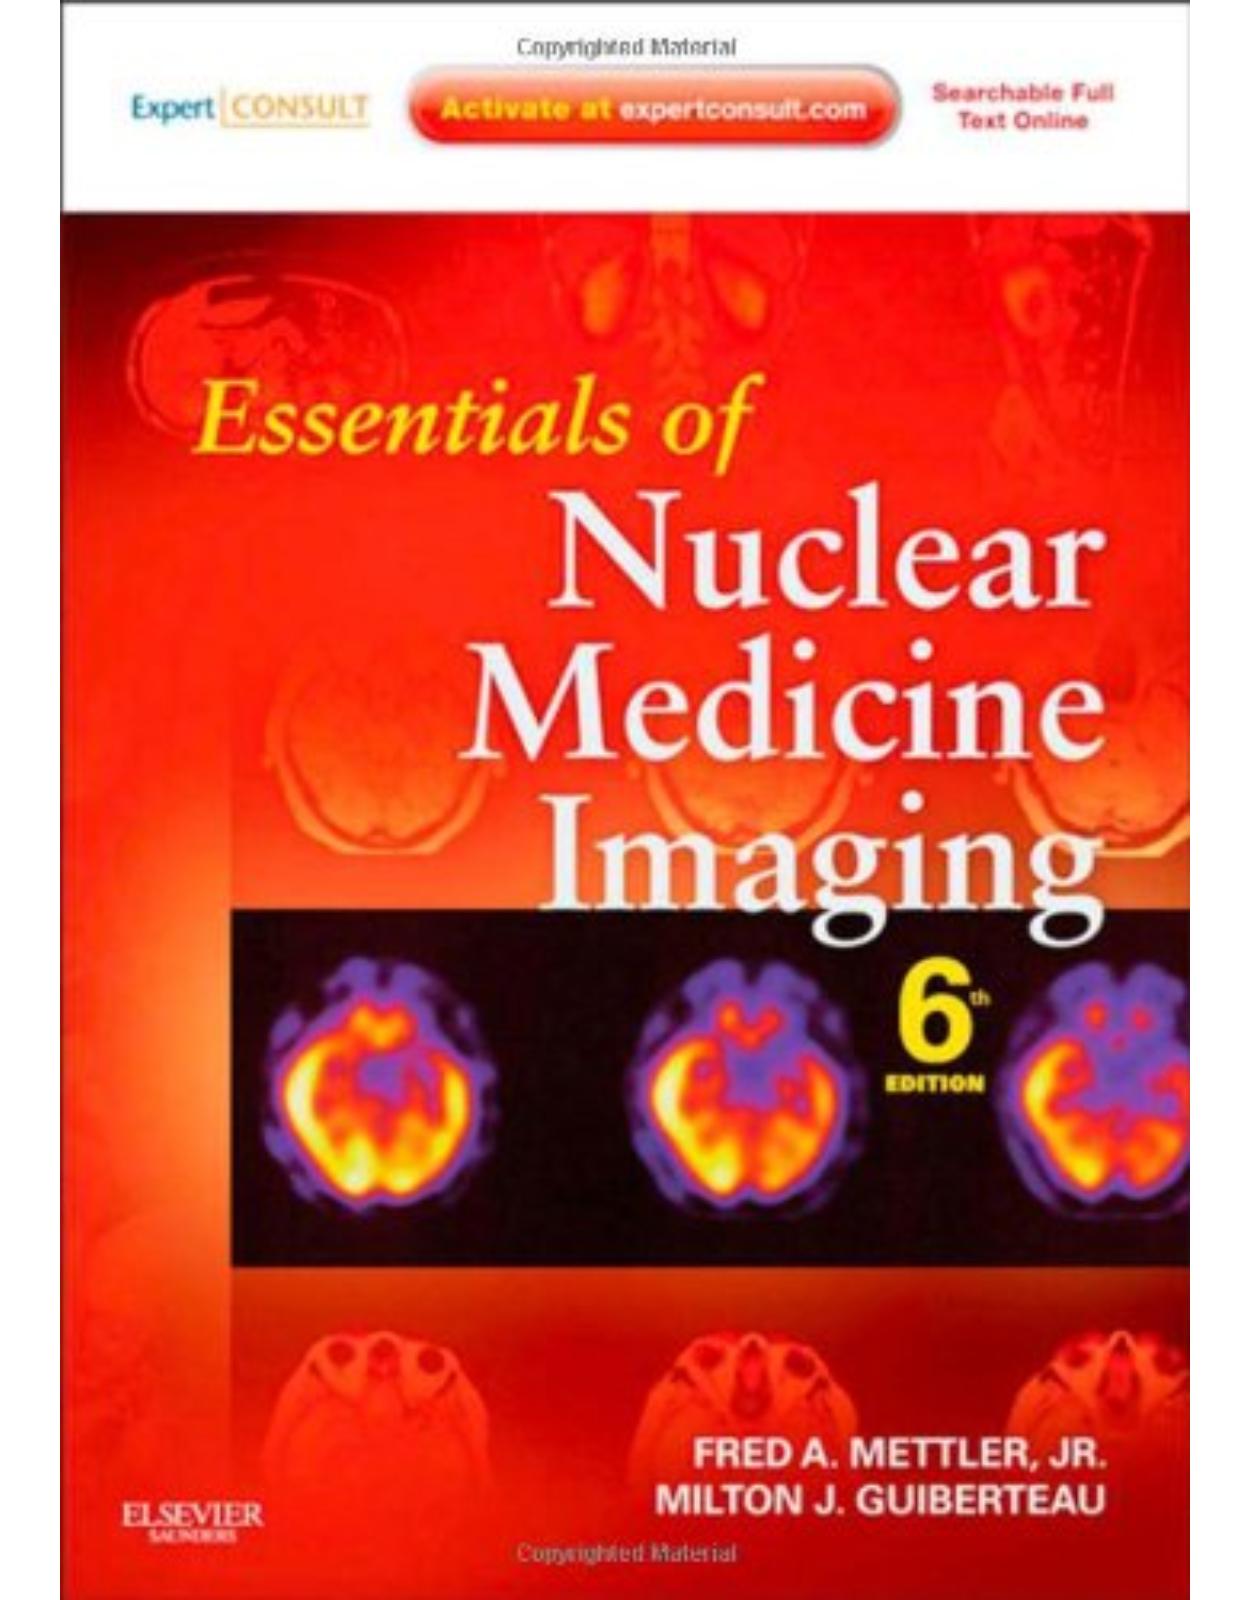 Essentials of Nuclear Medicine Imaging, 6th Edition